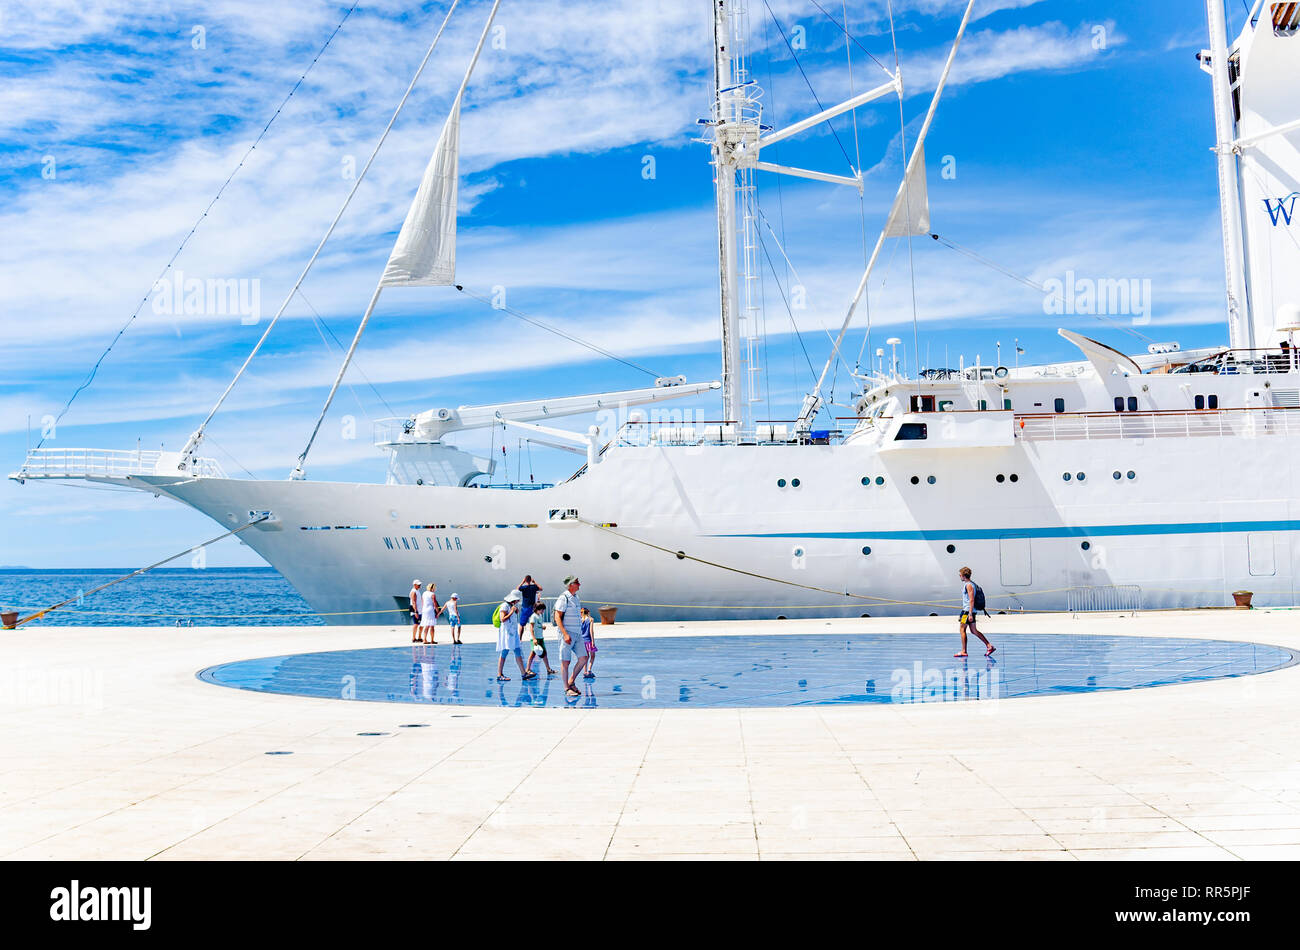 A large cruise sailing ship in the port on the embankment of the city of Zadar. Stock Photo